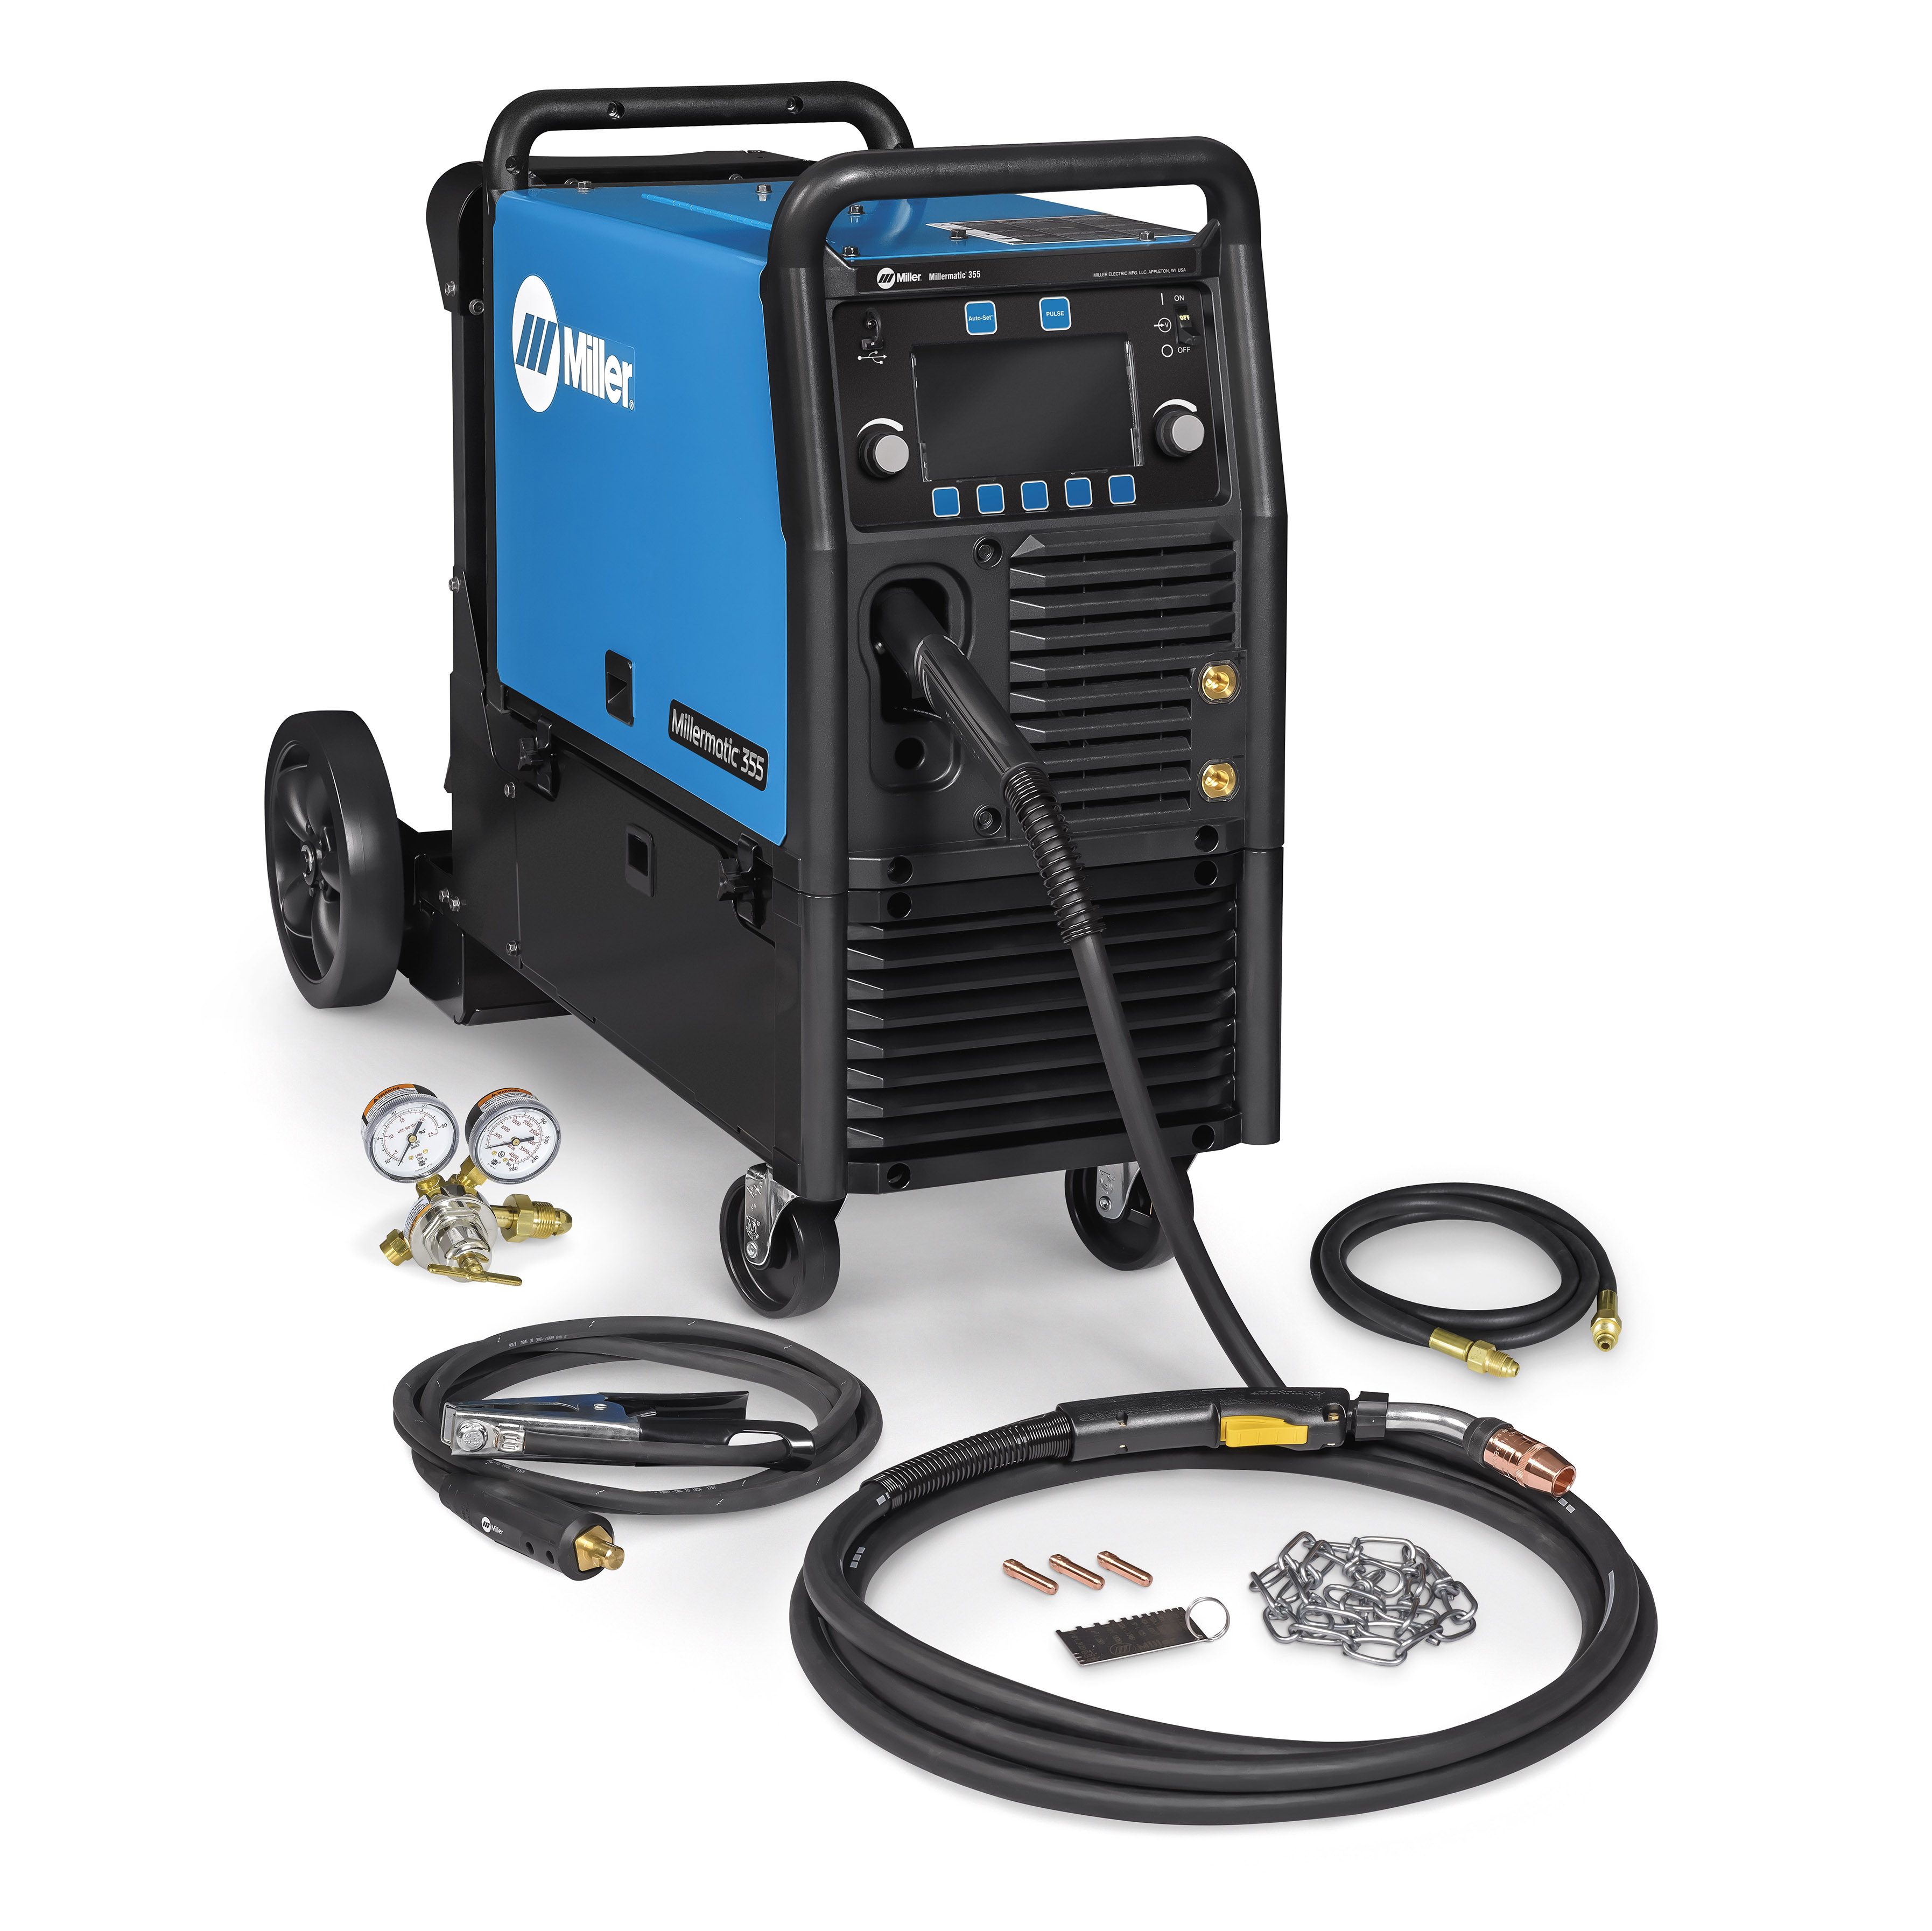 Main features of Stayer's MIG 131 and 165 MULTI multifunction welding  equipment 